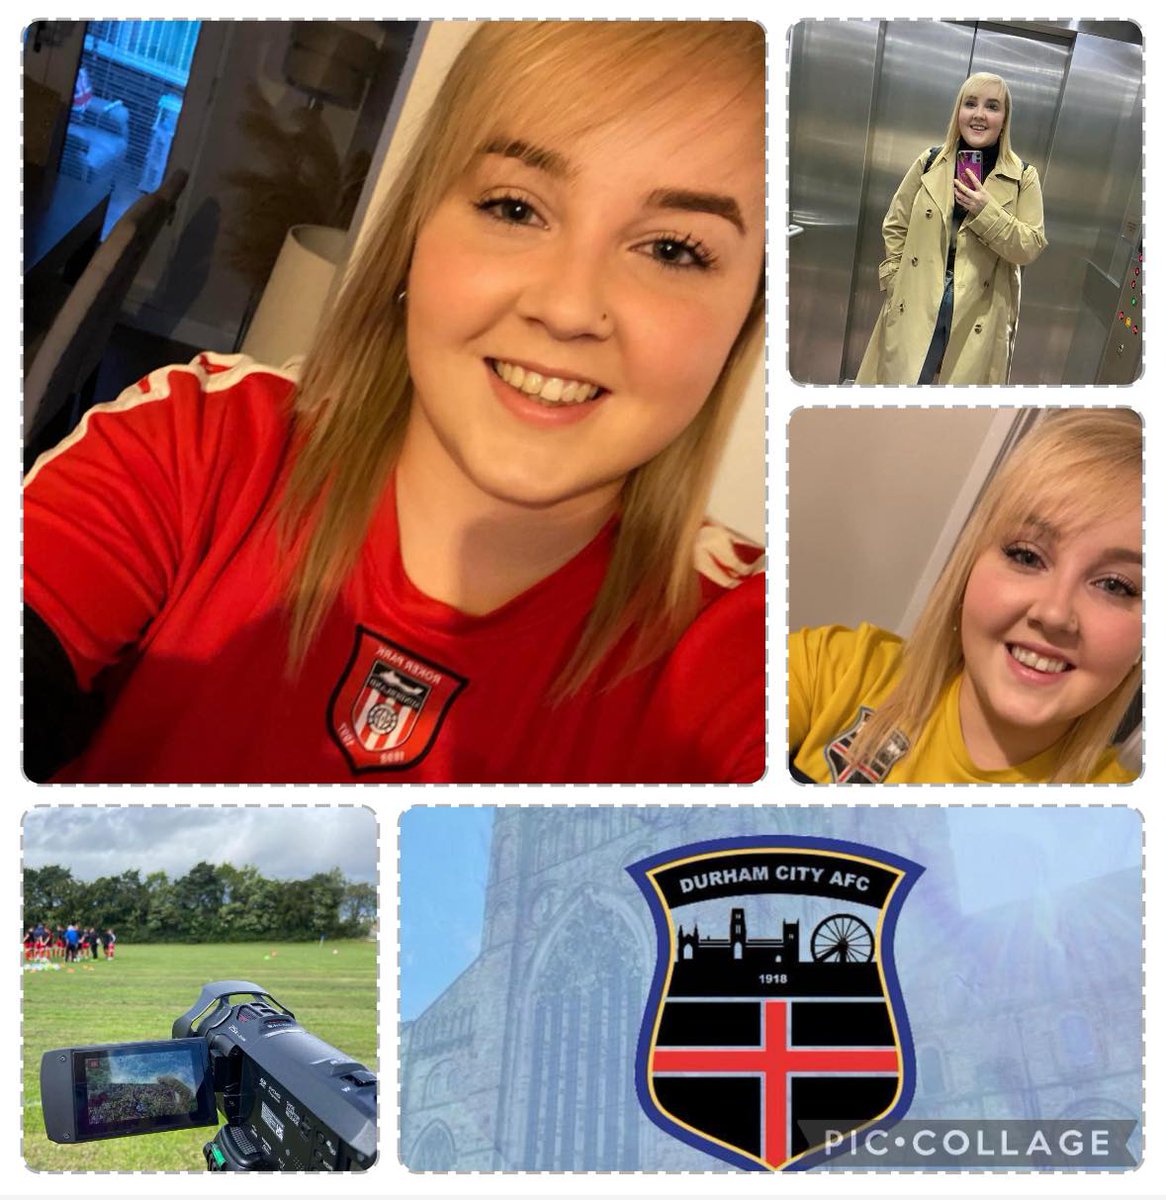 We would like to thank wish Happy Birthday to Durham City AFC amazing Social Media Manager, Charlotte Patterson. She is the inspiration behind so many of our brilliant posts. We would like you to help show her appreciation by joining us in wishing her an amazing birthday from…